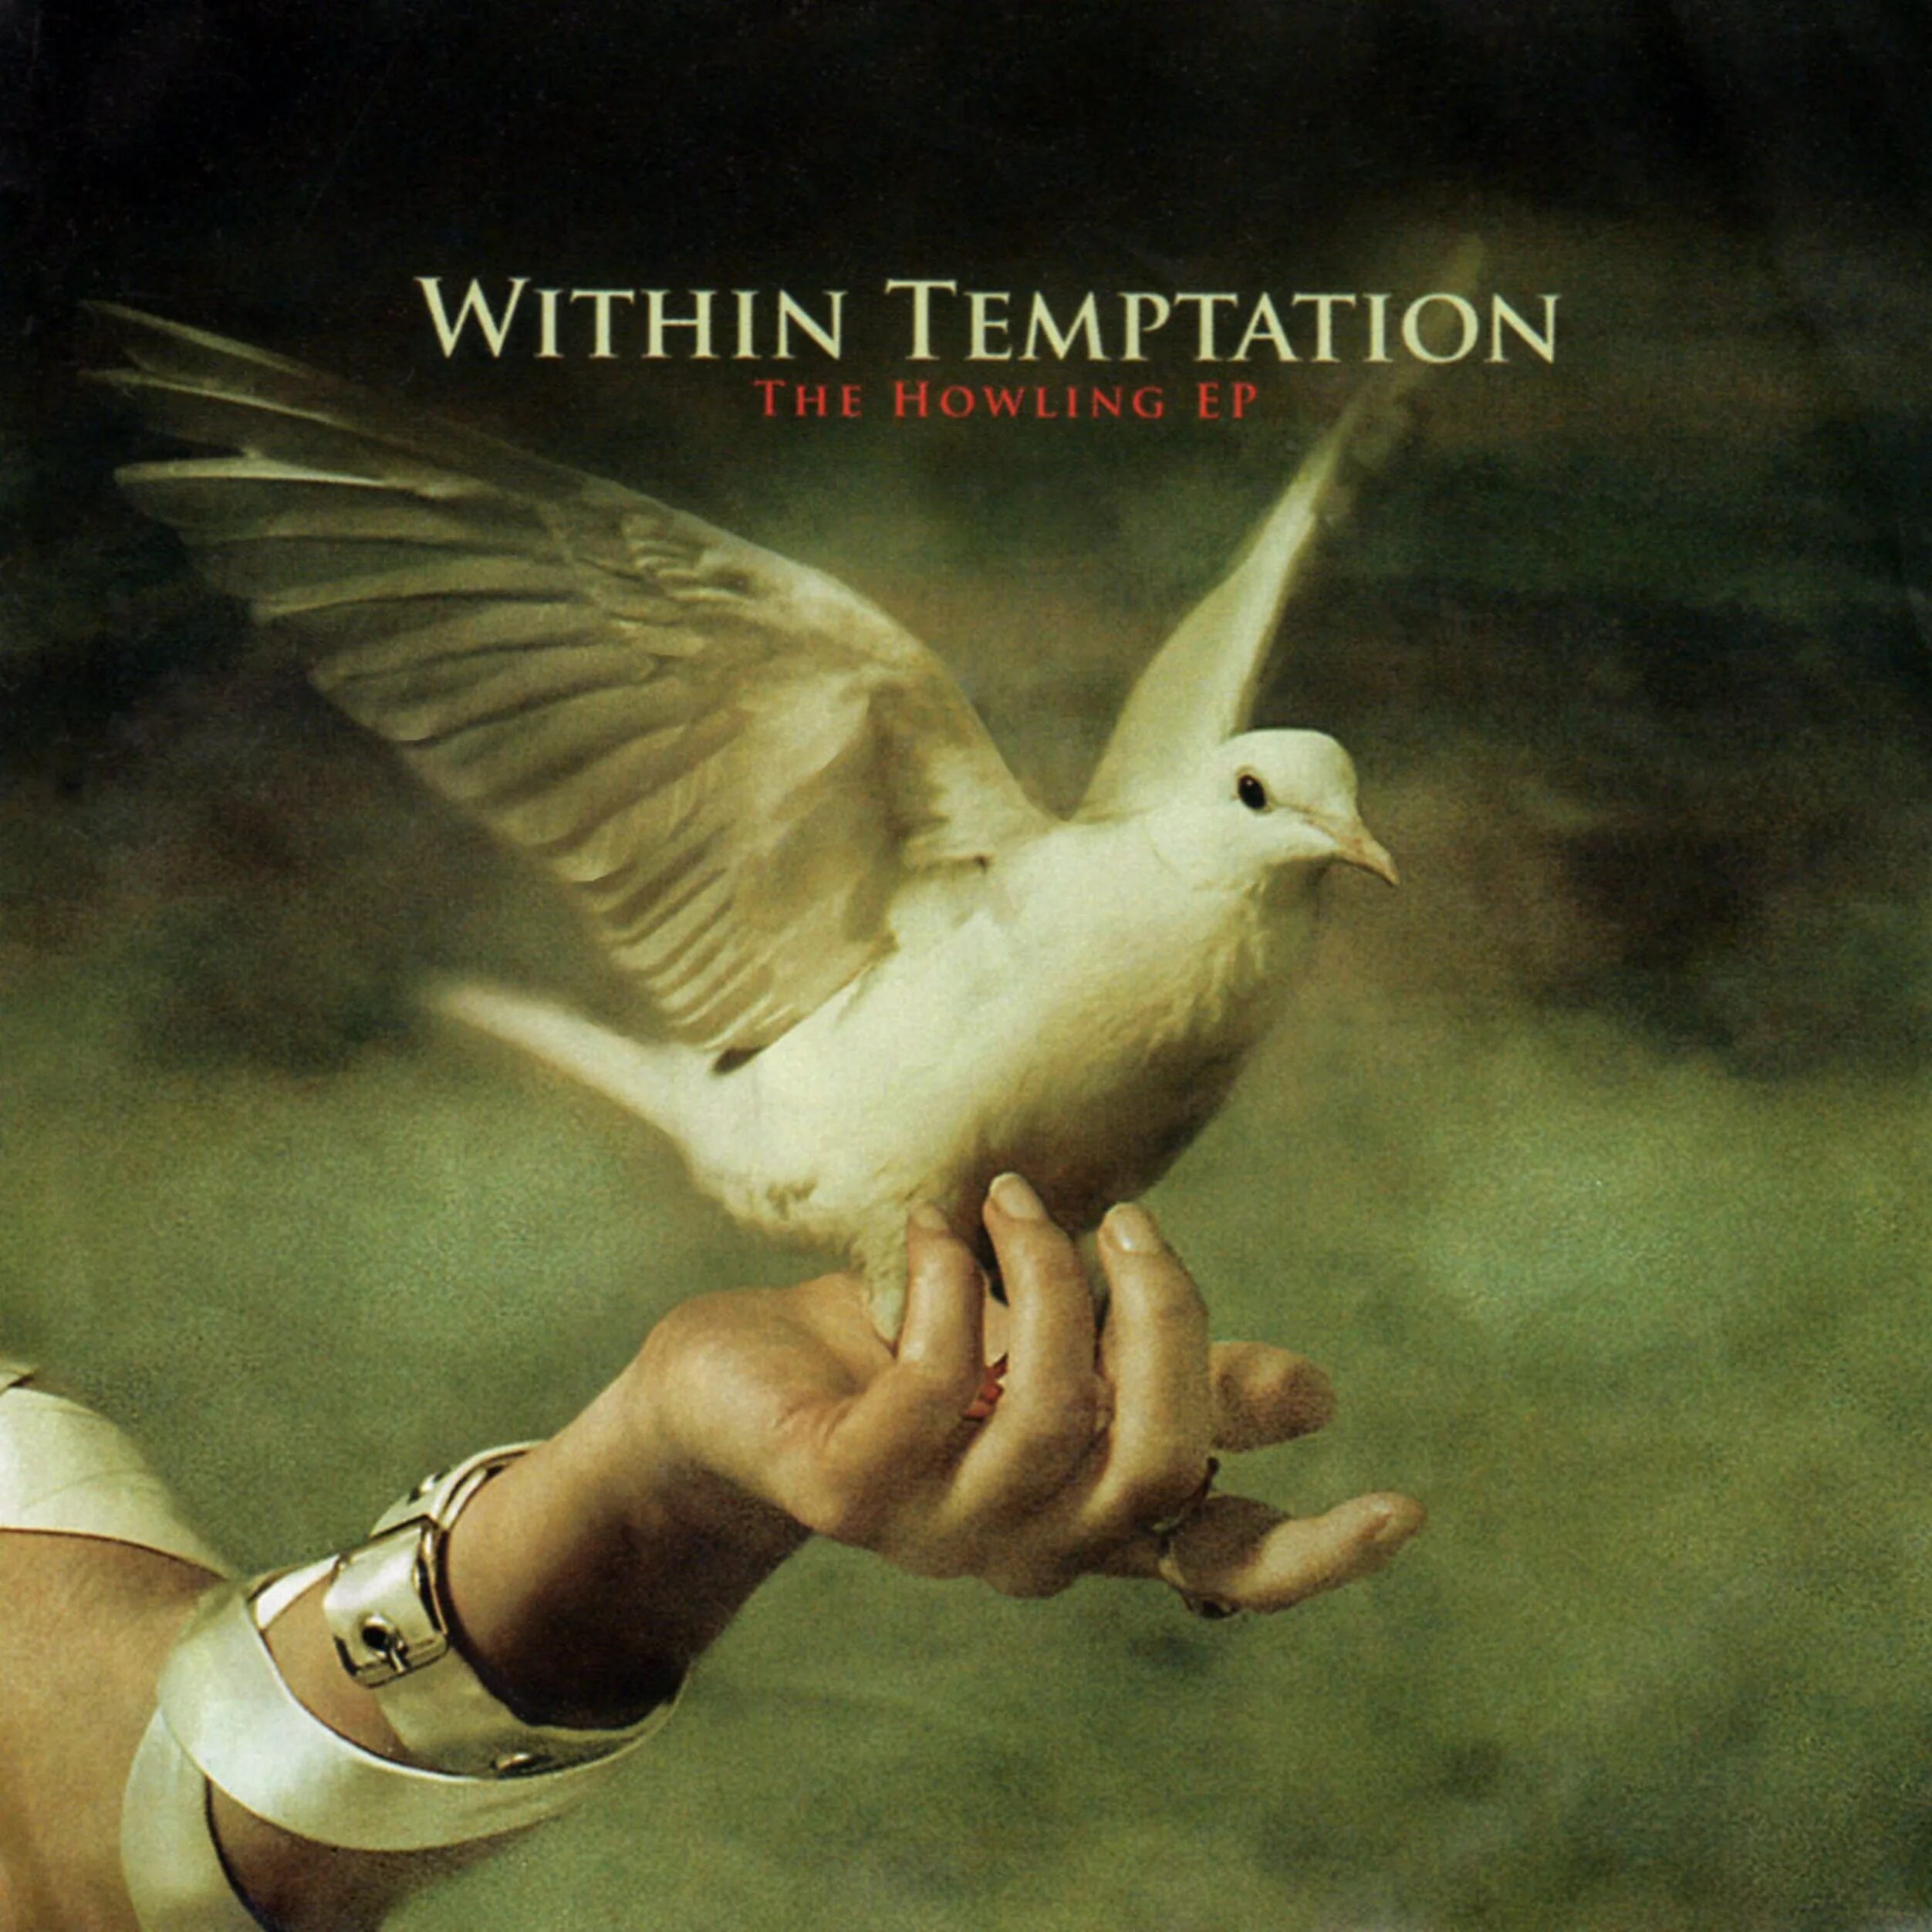 Within temptation альбомы. Within Temptation - the Howling обложка. Within Temptation the Heart of everything 2007. Within Temptation обложки. Within Temptation the Heart of everything альбом.